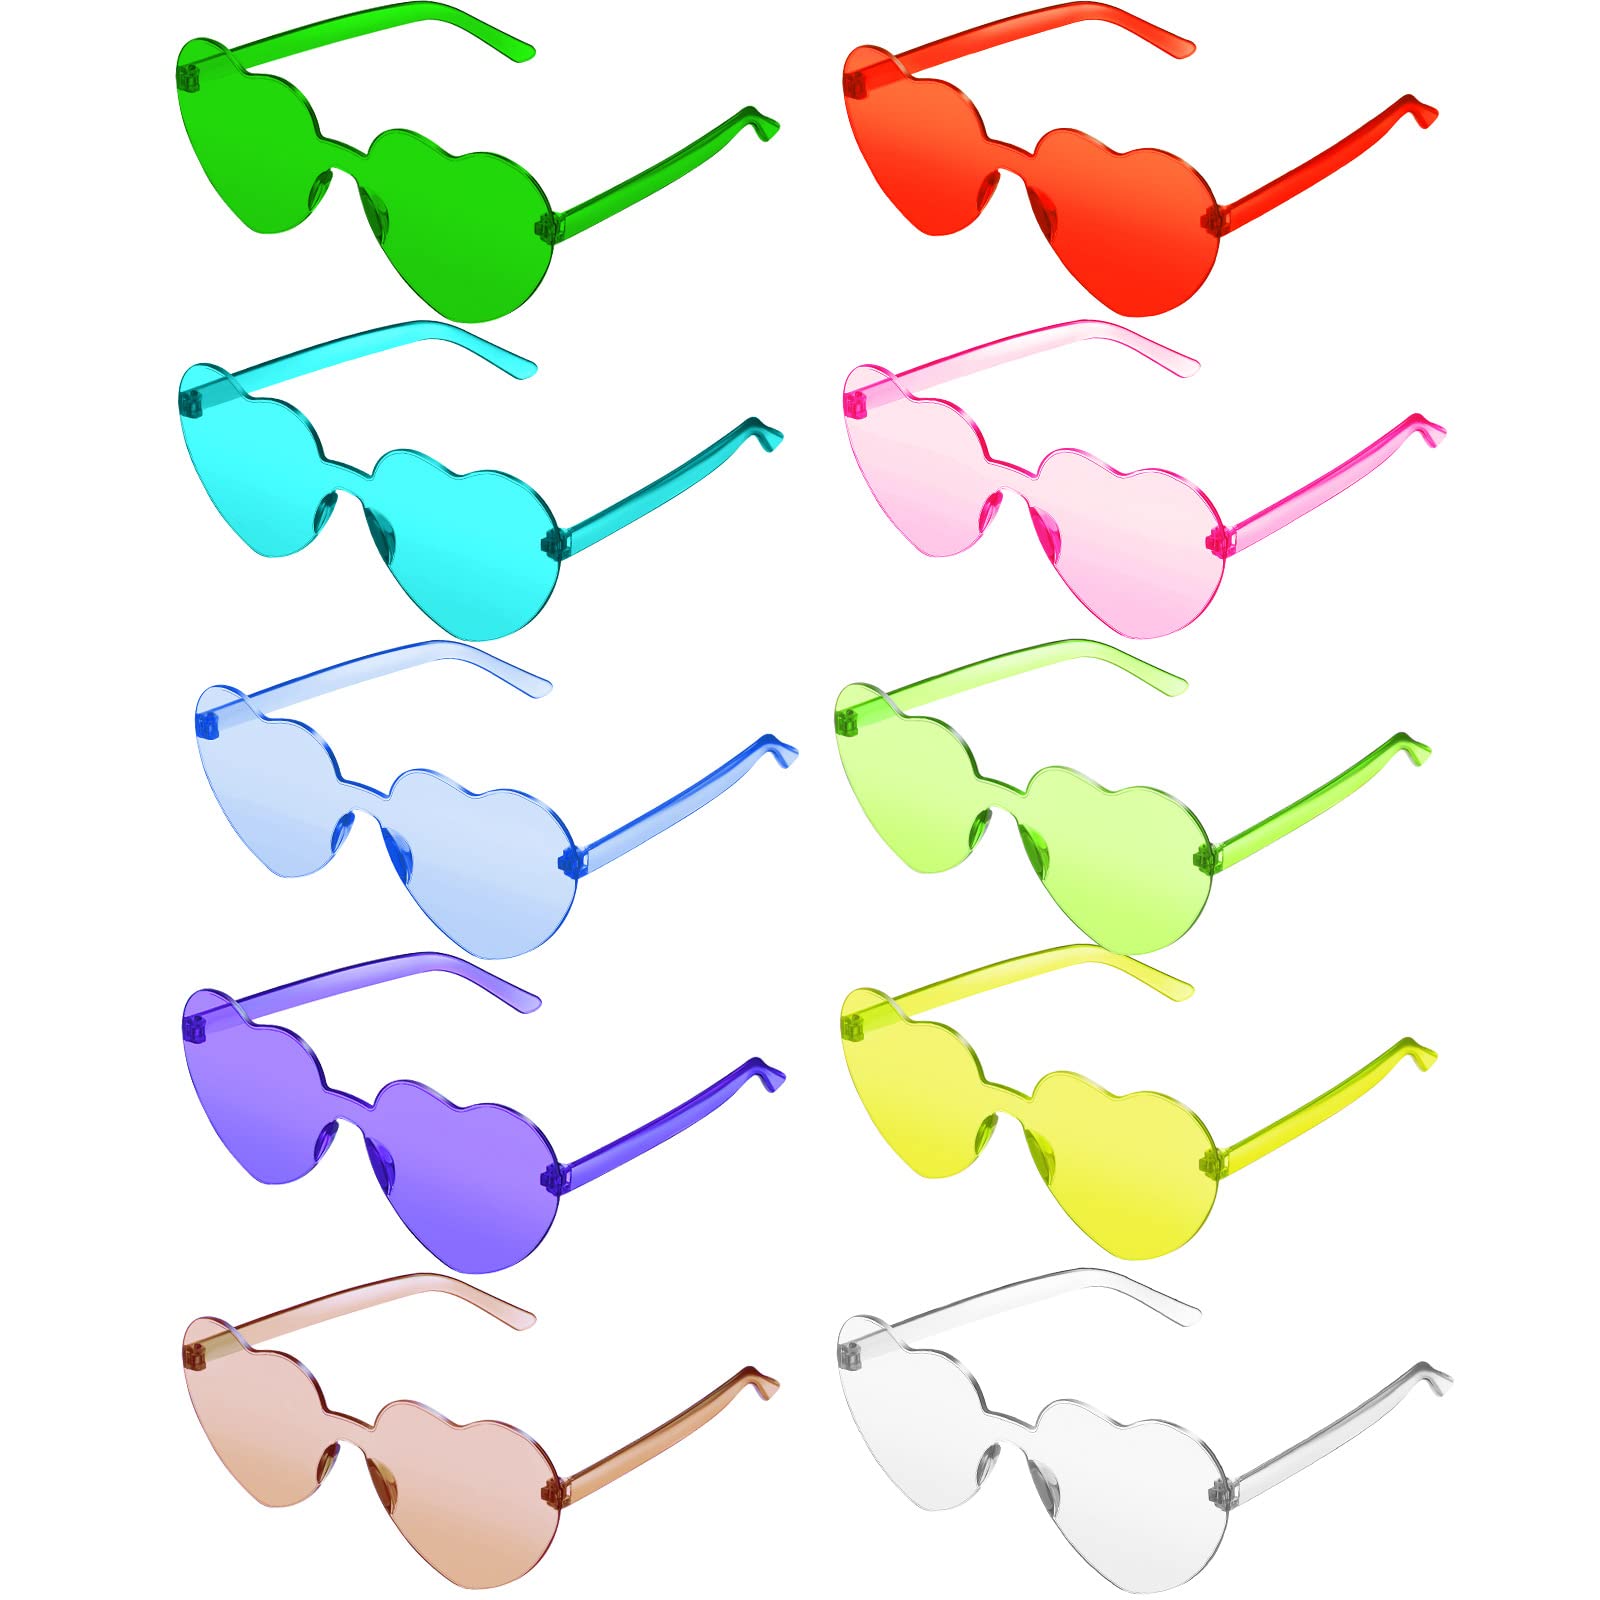 toodoo 10 Pairs Heart Shaped Sunglasses Rainbow Sunglasses Candy Color Rimless Glasses For Women Girl Party Favor(Multicolored)